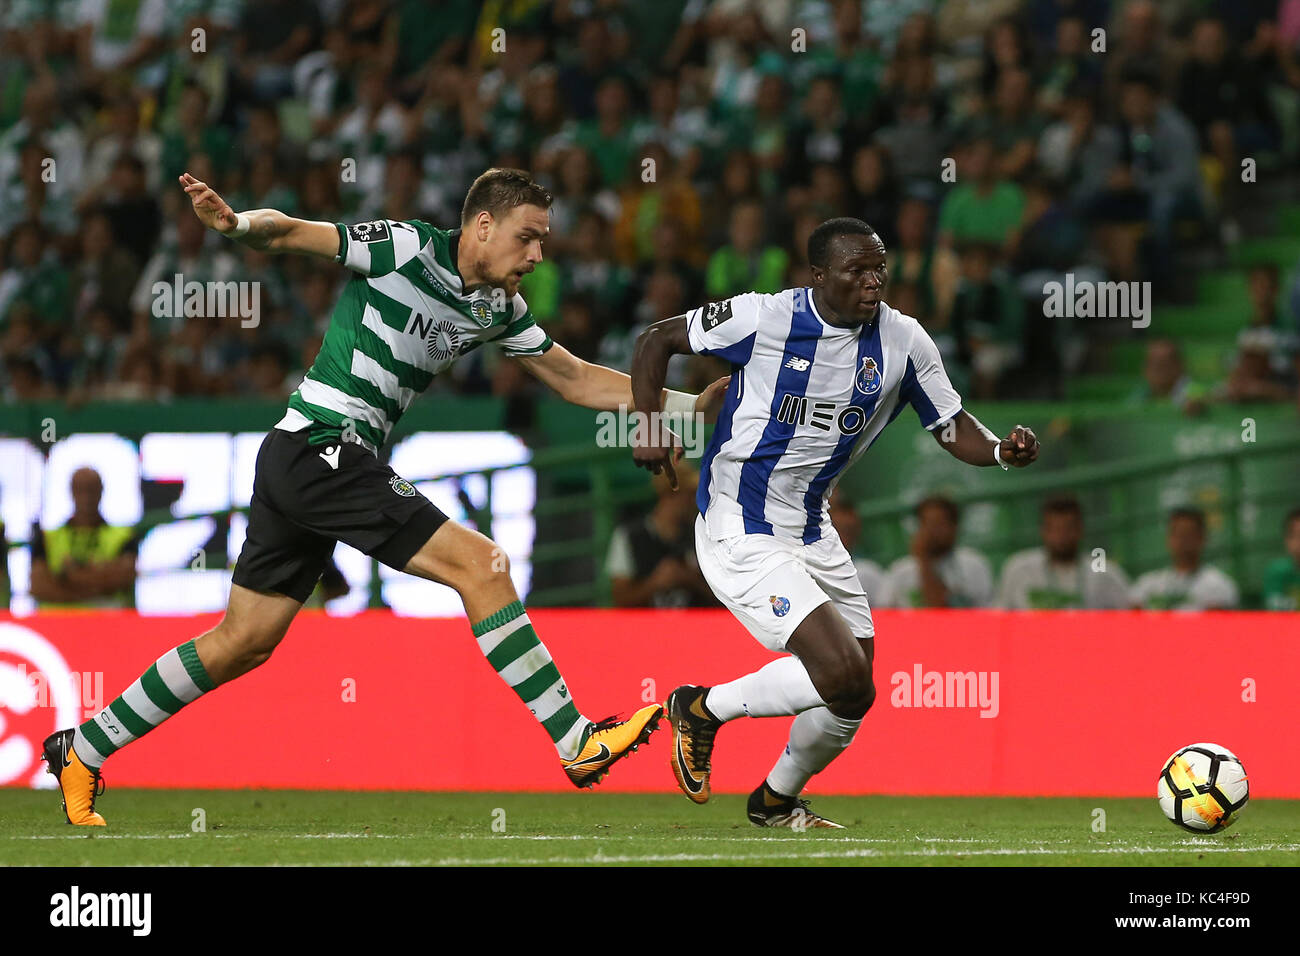 Lisbon, Portugal. 01st Oct, 2017. Sporting«s defender Sebastian Coates from Uruguay (L) and FC PortoÕs forward Vincent Aboubakar from Cameroon (R) during Premier League 2017/18 match between Sporting CP and FC Porto, at Alvalade Stadium in Lisbon on October 1, 2017. (Photo by Bruno Barros / DPI) Credit: Bruno Barros/Alamy Live News Stock Photo